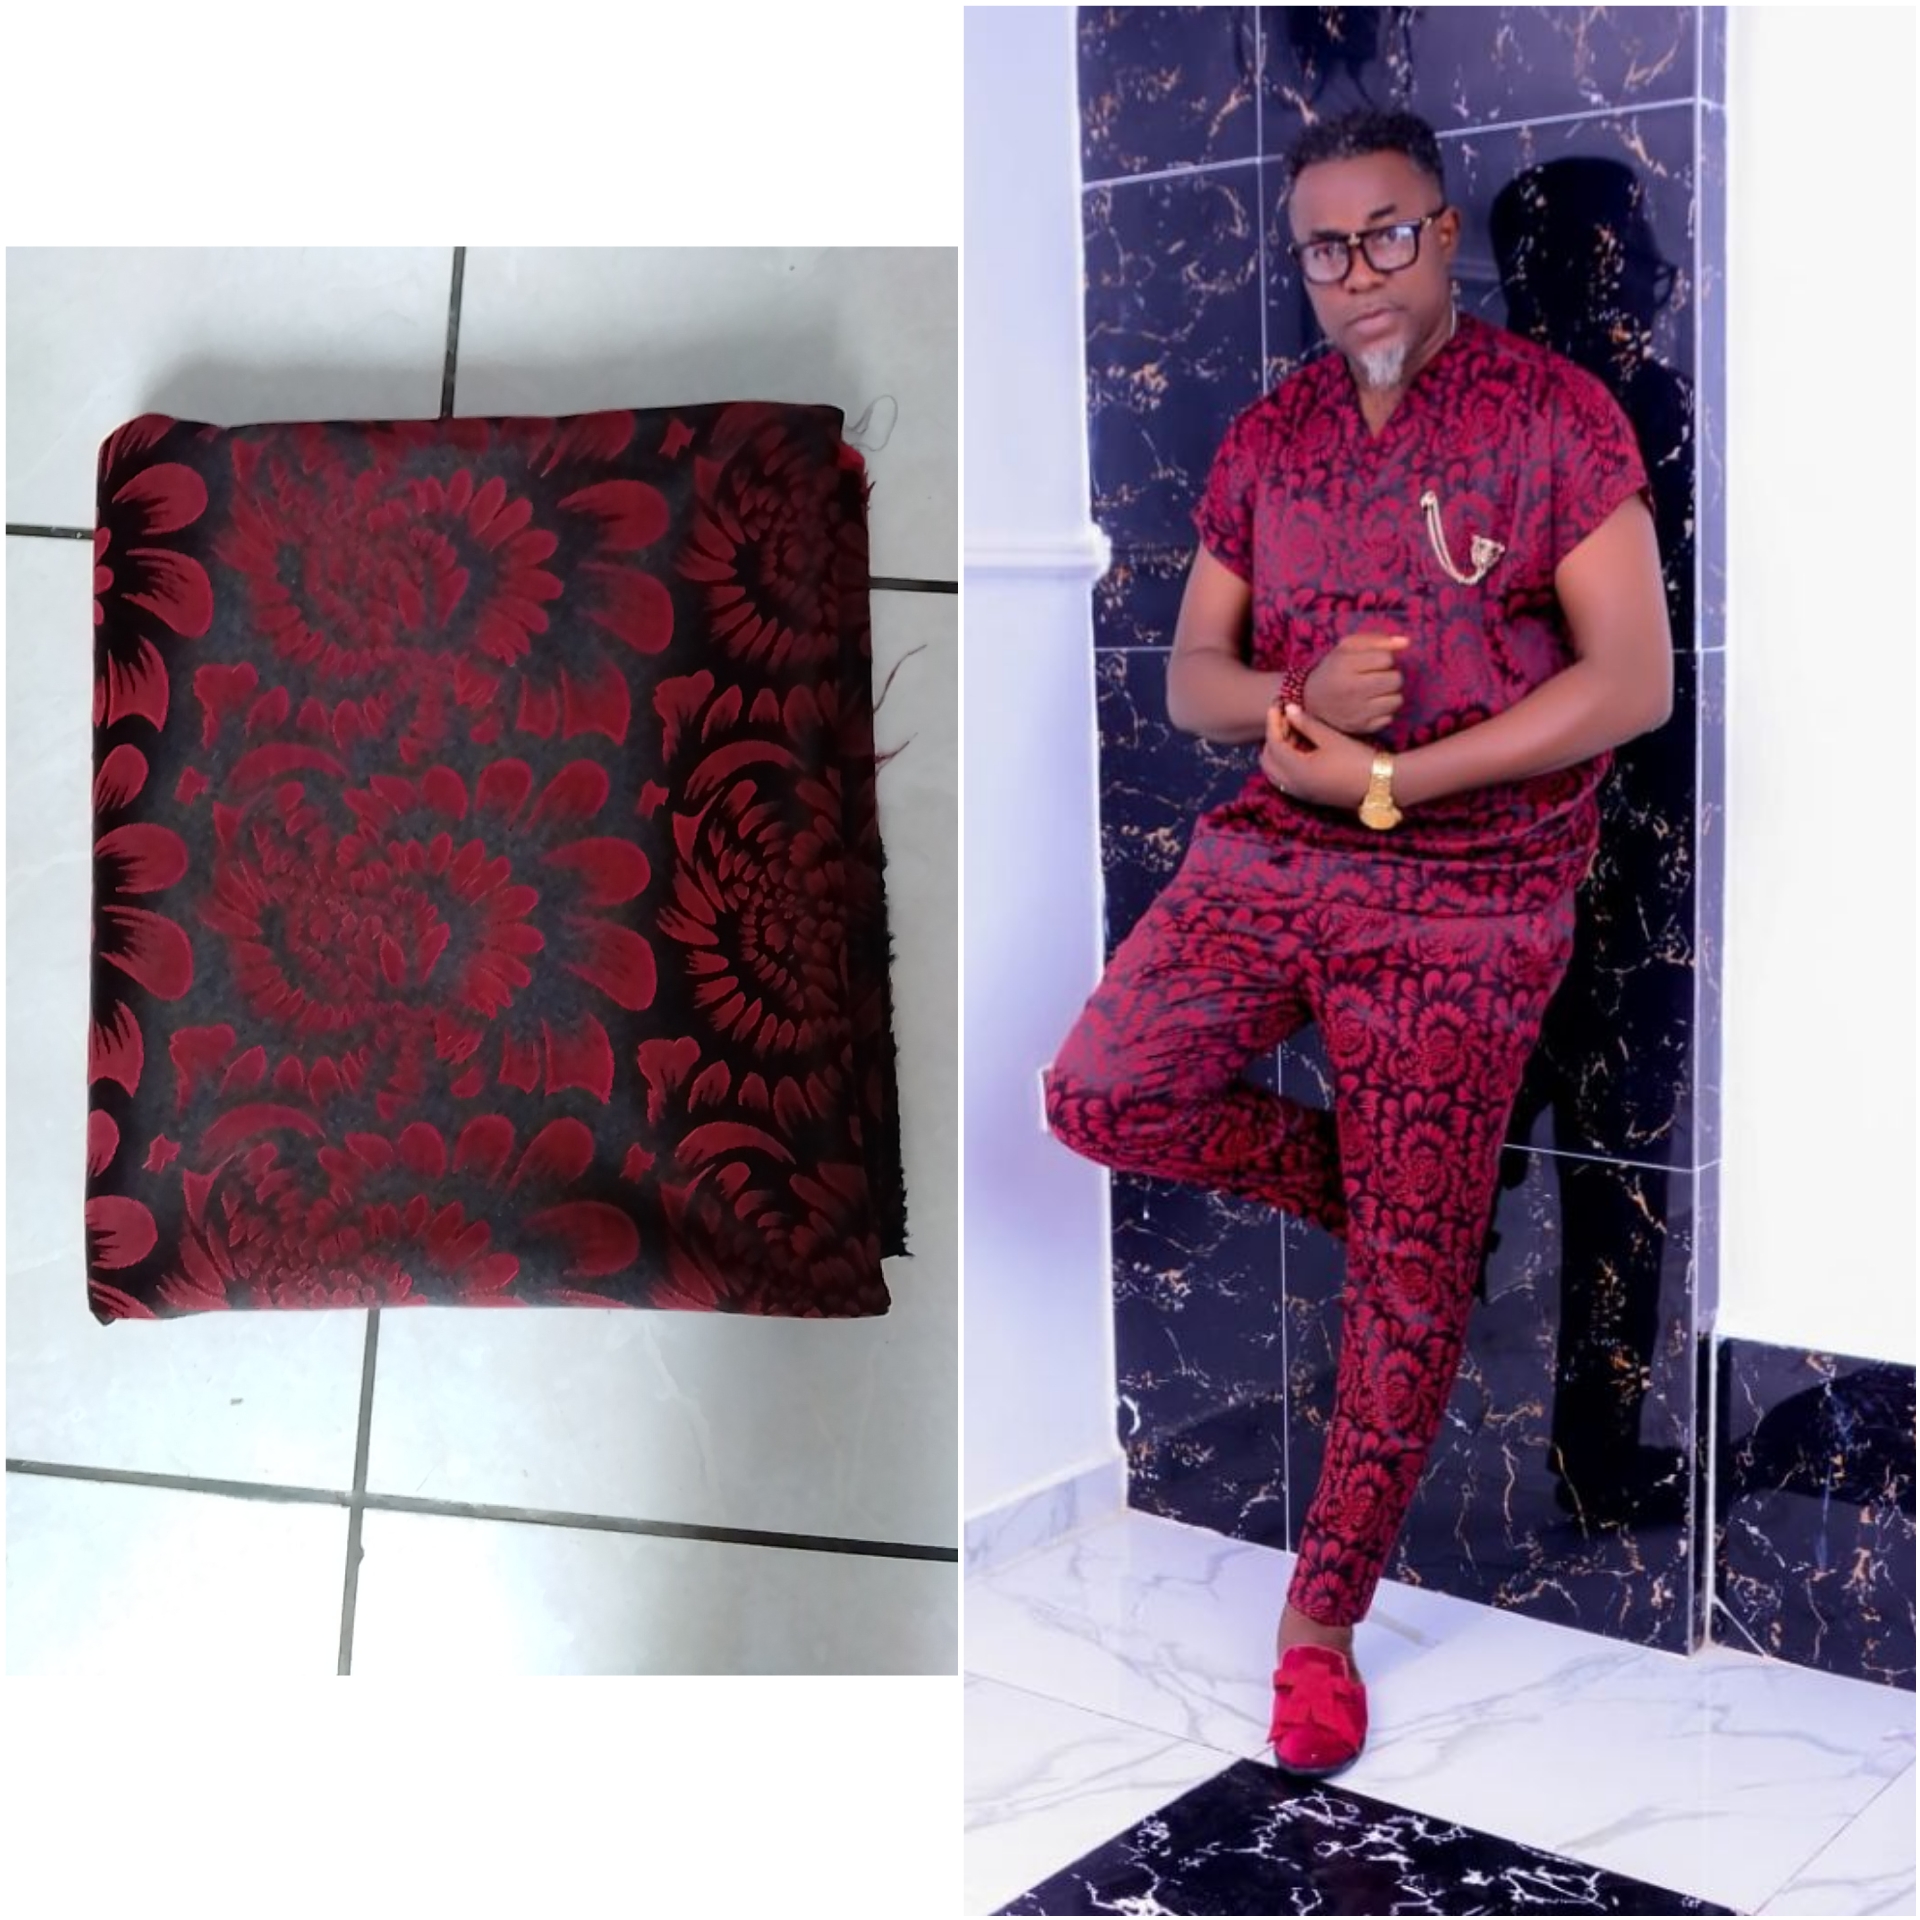 Damask Patterned Fabric - 4 Yards  Free Online Marketplace to Buy & Sell  in Nigeria